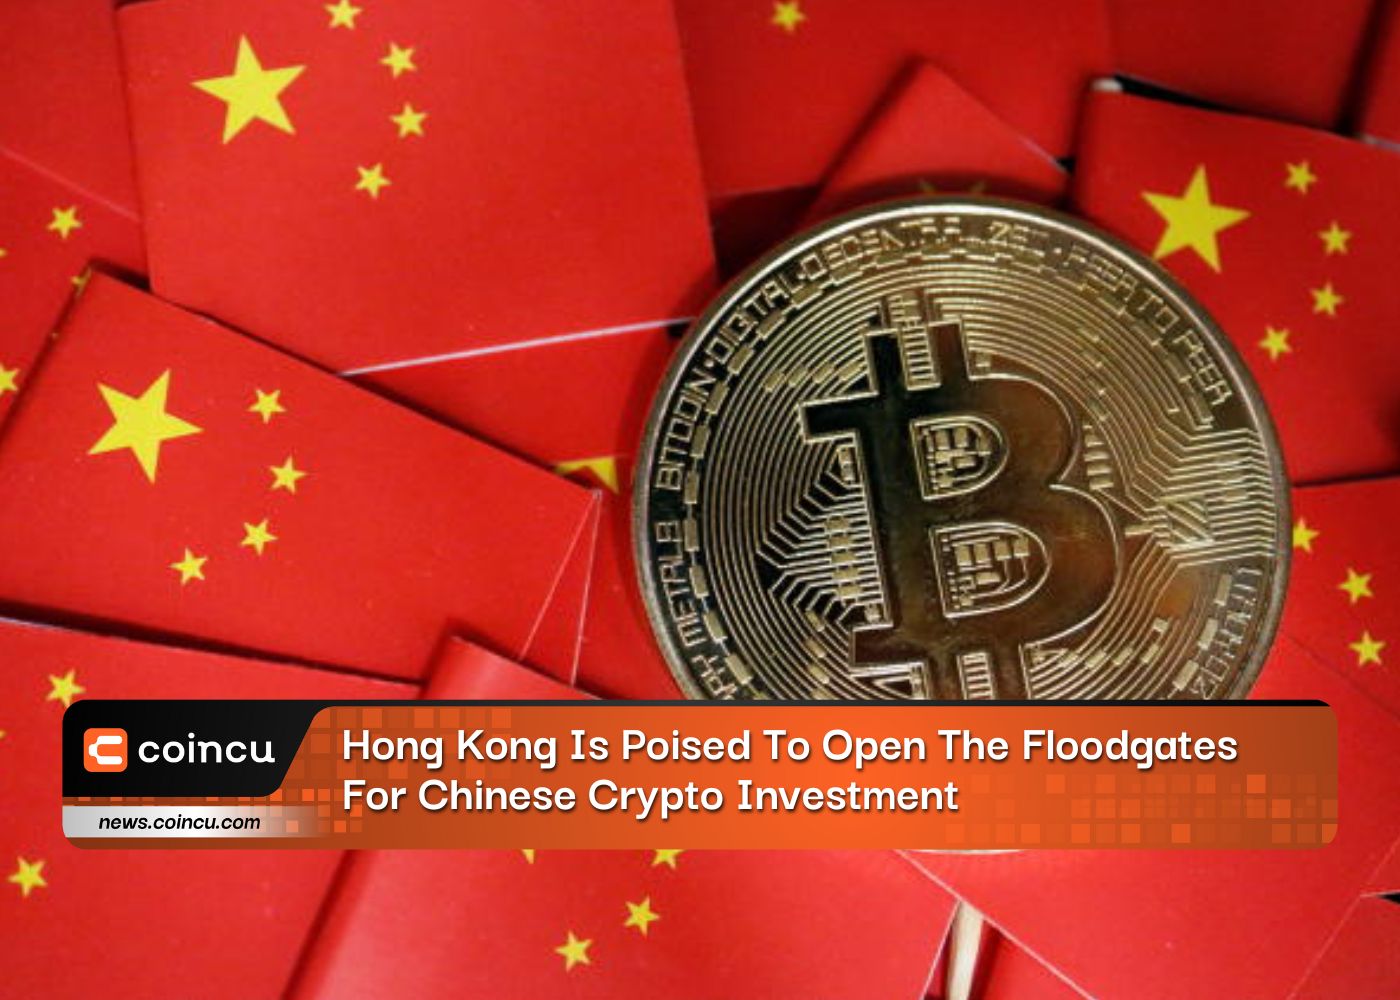 Hong Kong Is Poised To Open The Floodgates For Chinese Crypto Investment